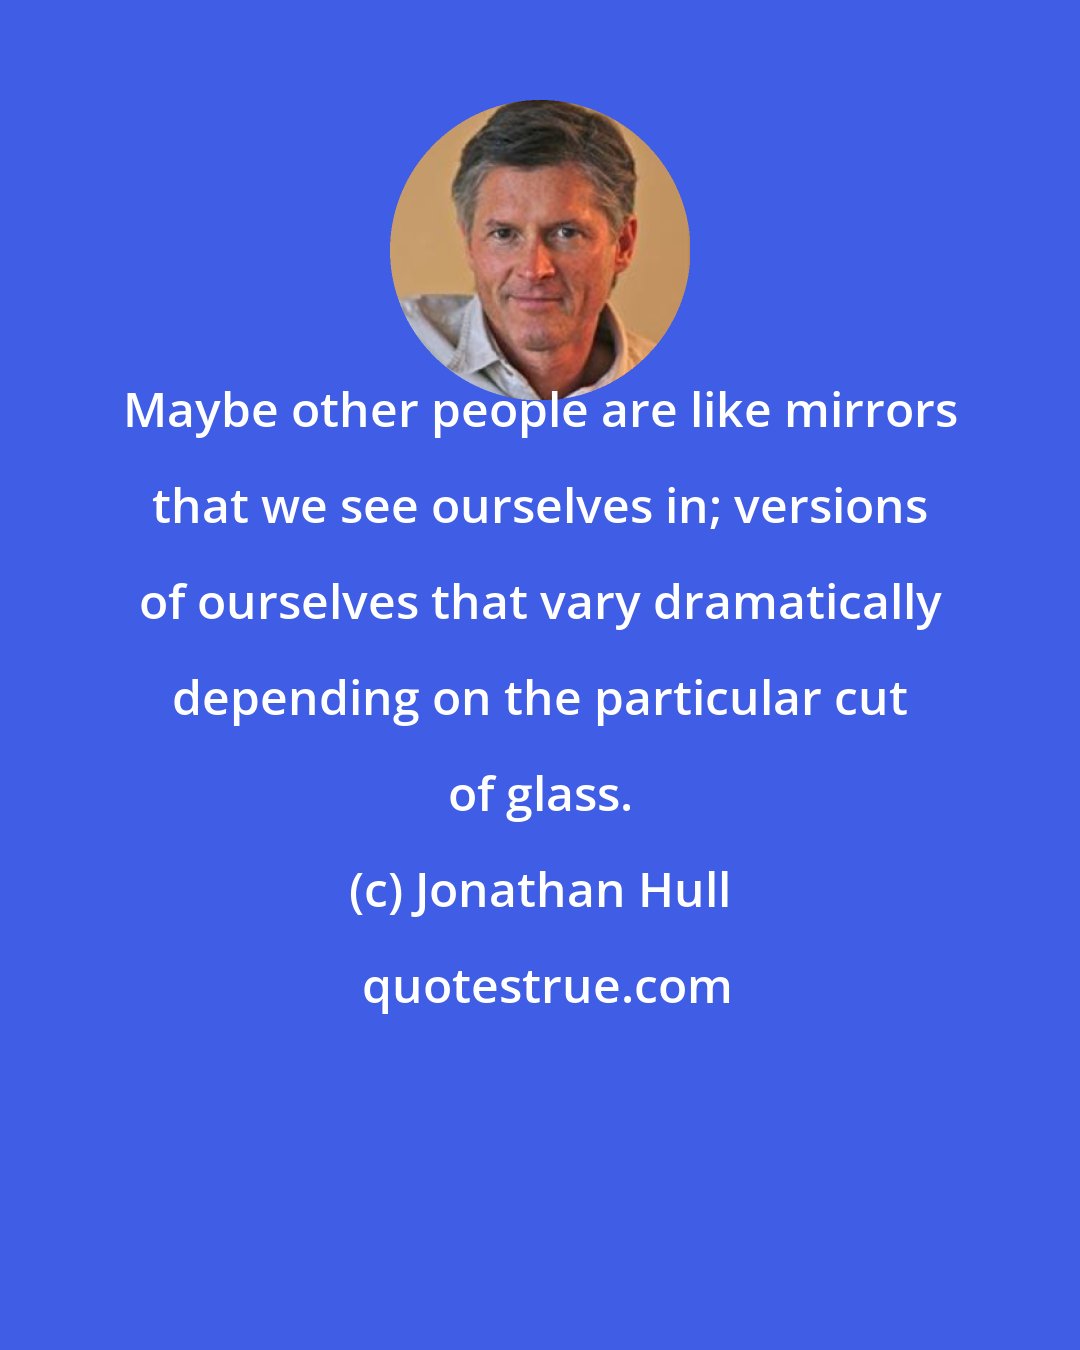 Jonathan Hull: Maybe other people are like mirrors that we see ourselves in; versions of ourselves that vary dramatically depending on the particular cut of glass.